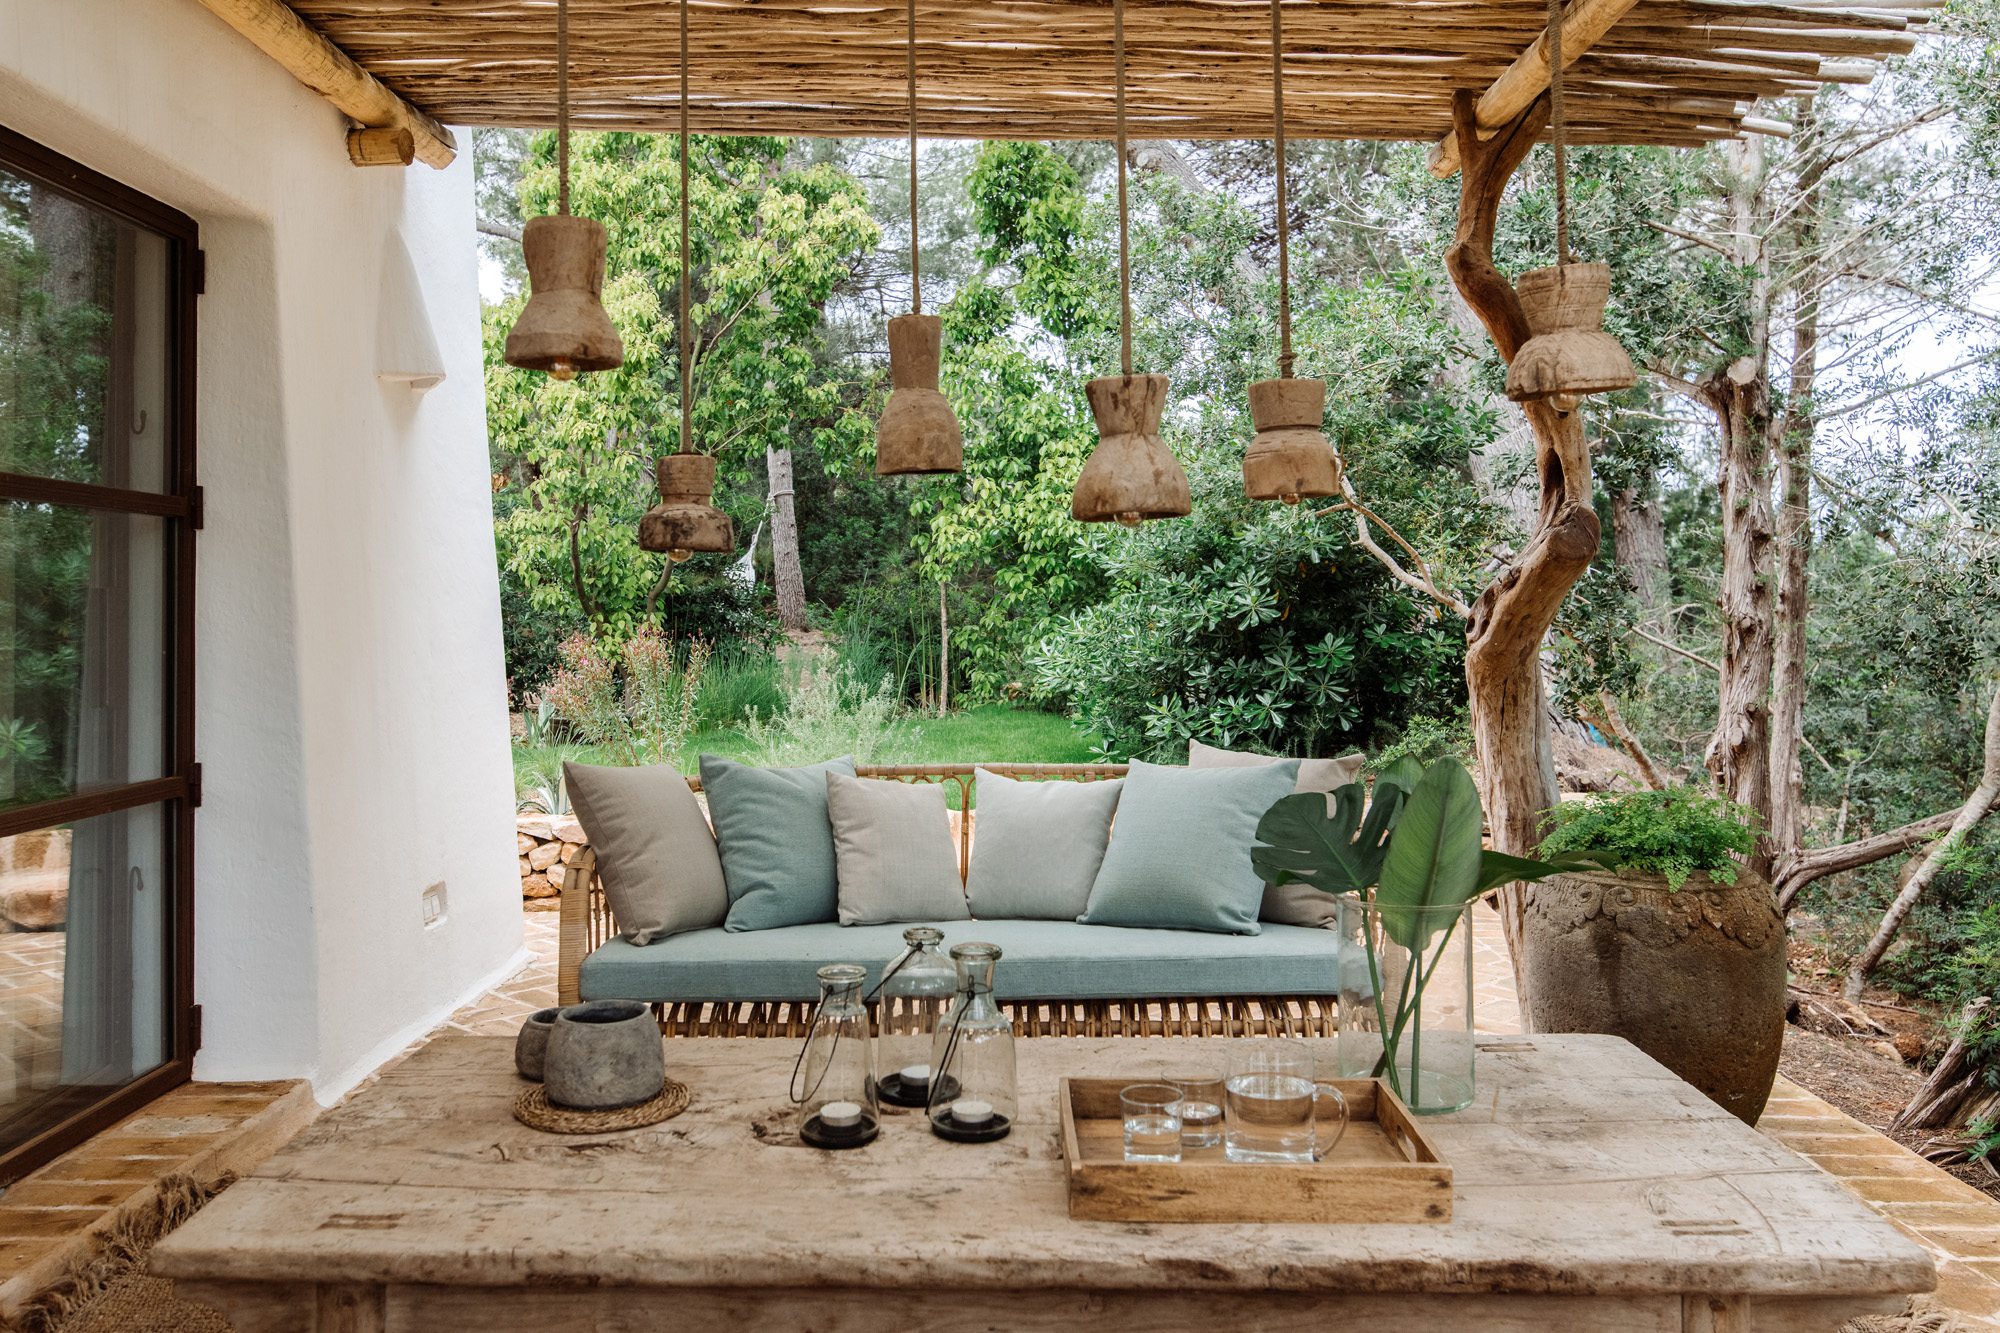 Hanging Lights and Canopy by Jungle Studios - modern landscape design practice in Ibiza